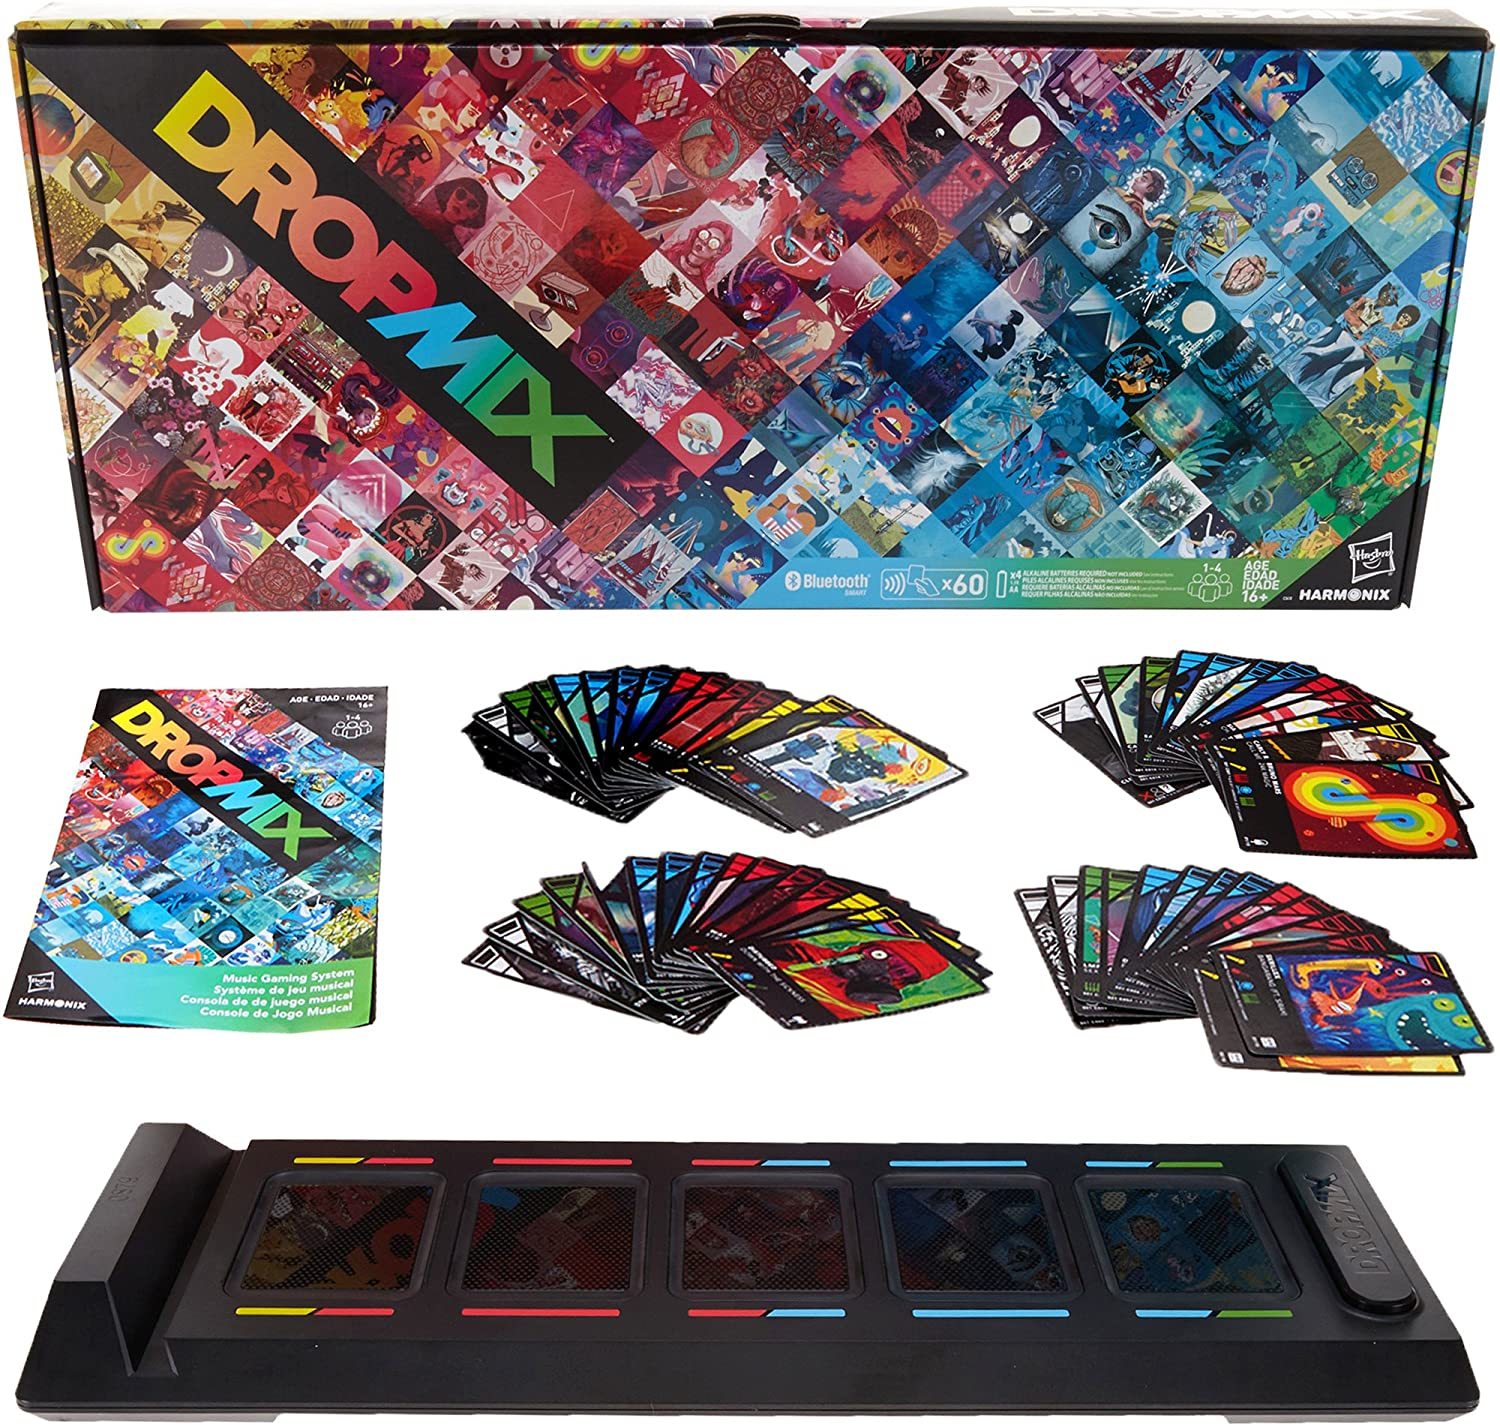 DropMix Music Gaming System - $129.99